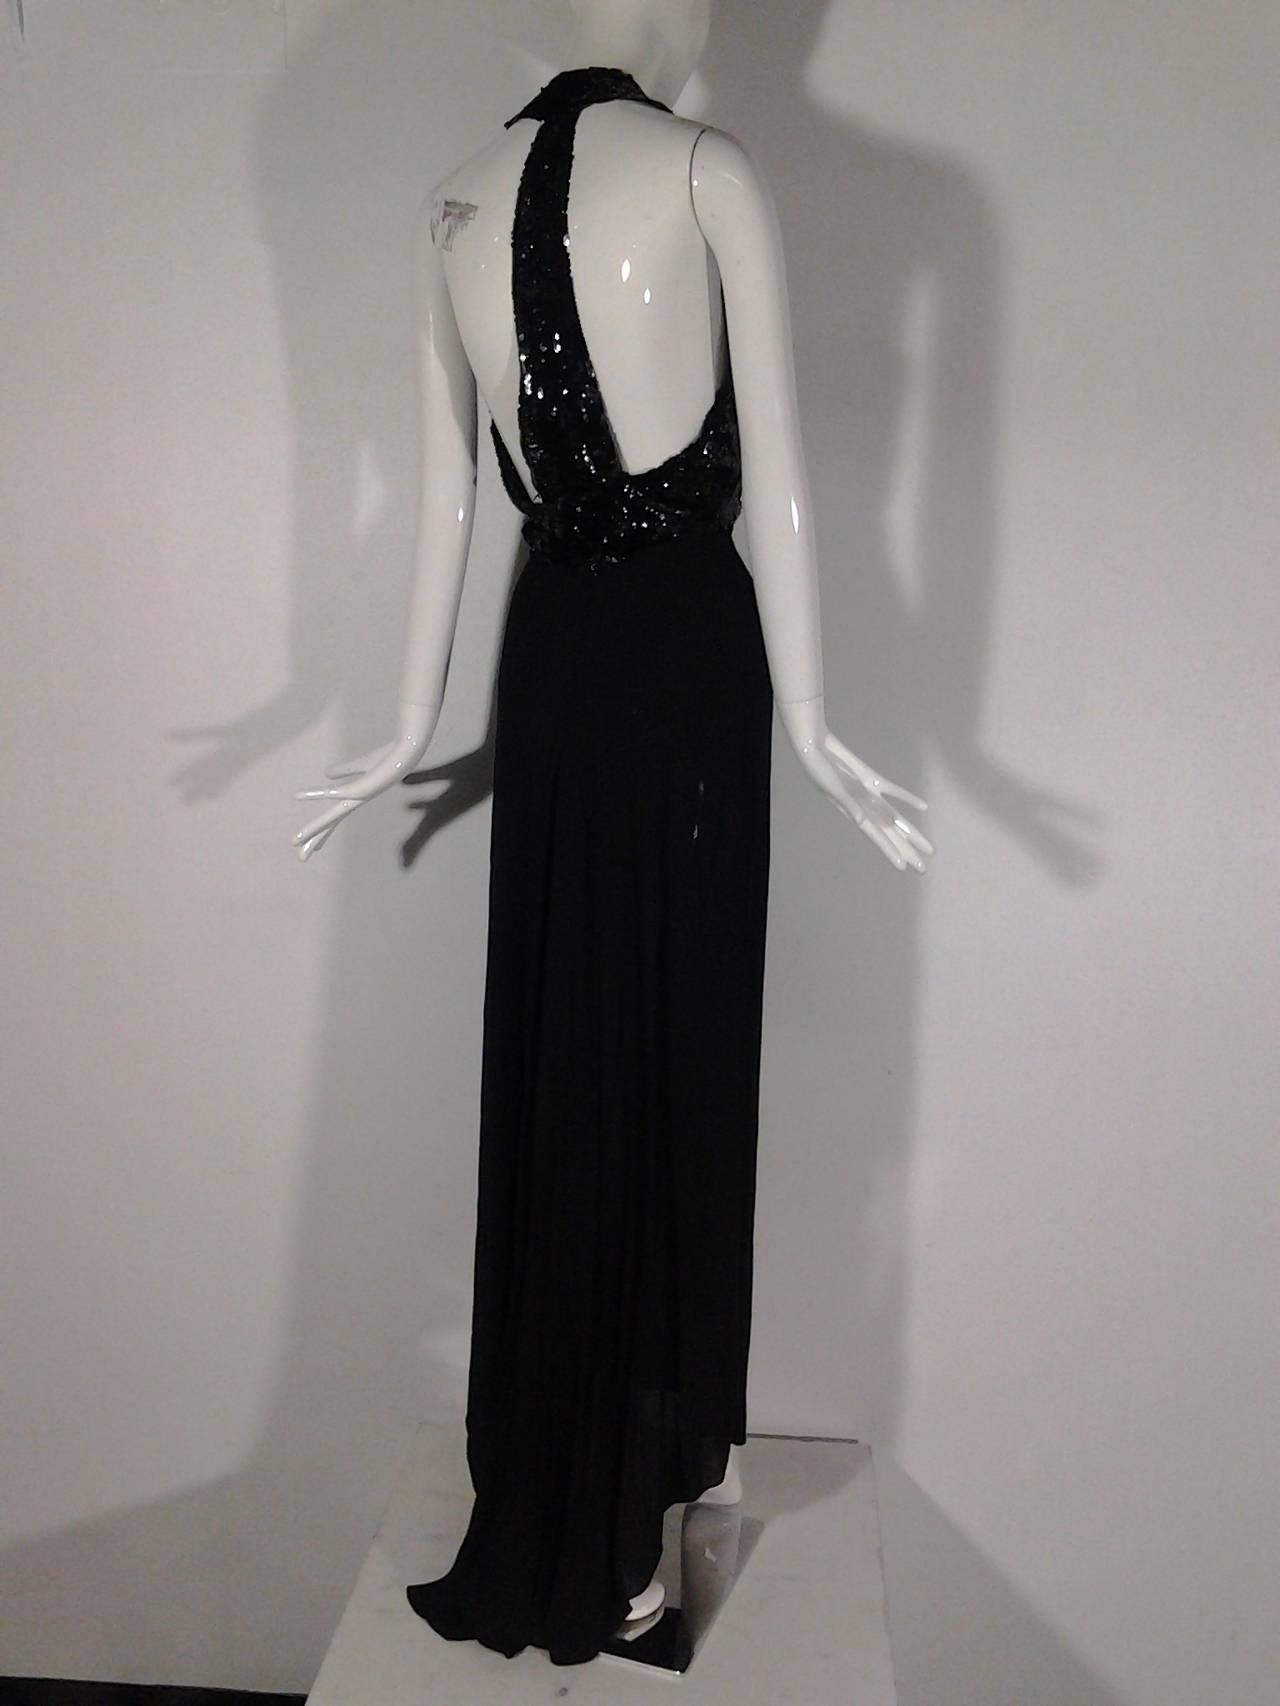 Women's 1930s Black Sequin Gown with Racer Back